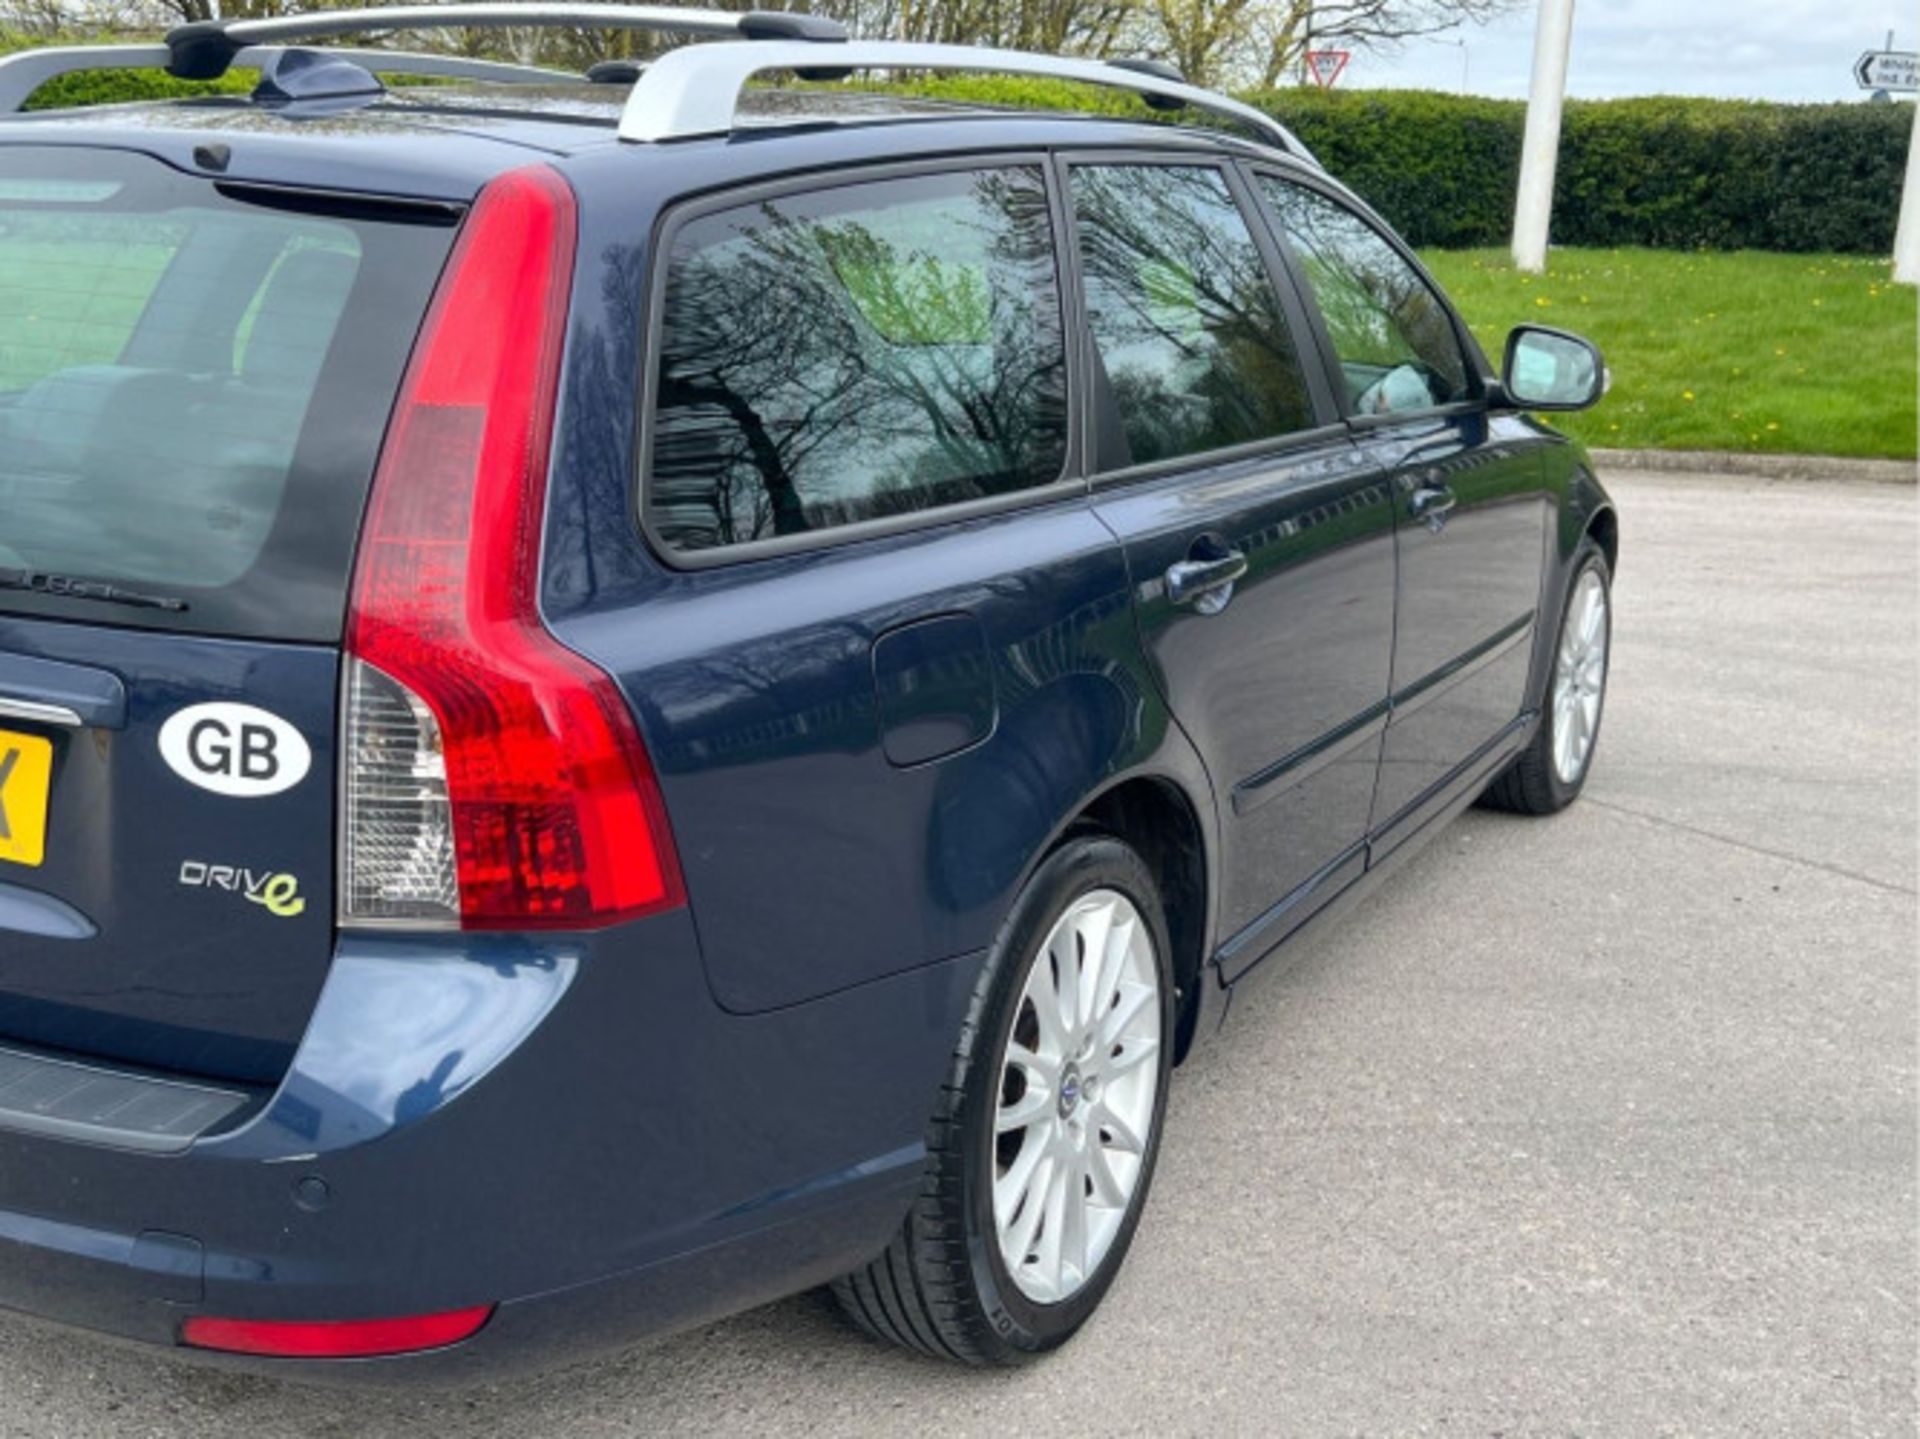 VOLVO V50 1.6D DRIVE SE LUX EDITION EURO 5 (S/S) 5DR (2012) - Image 76 of 88